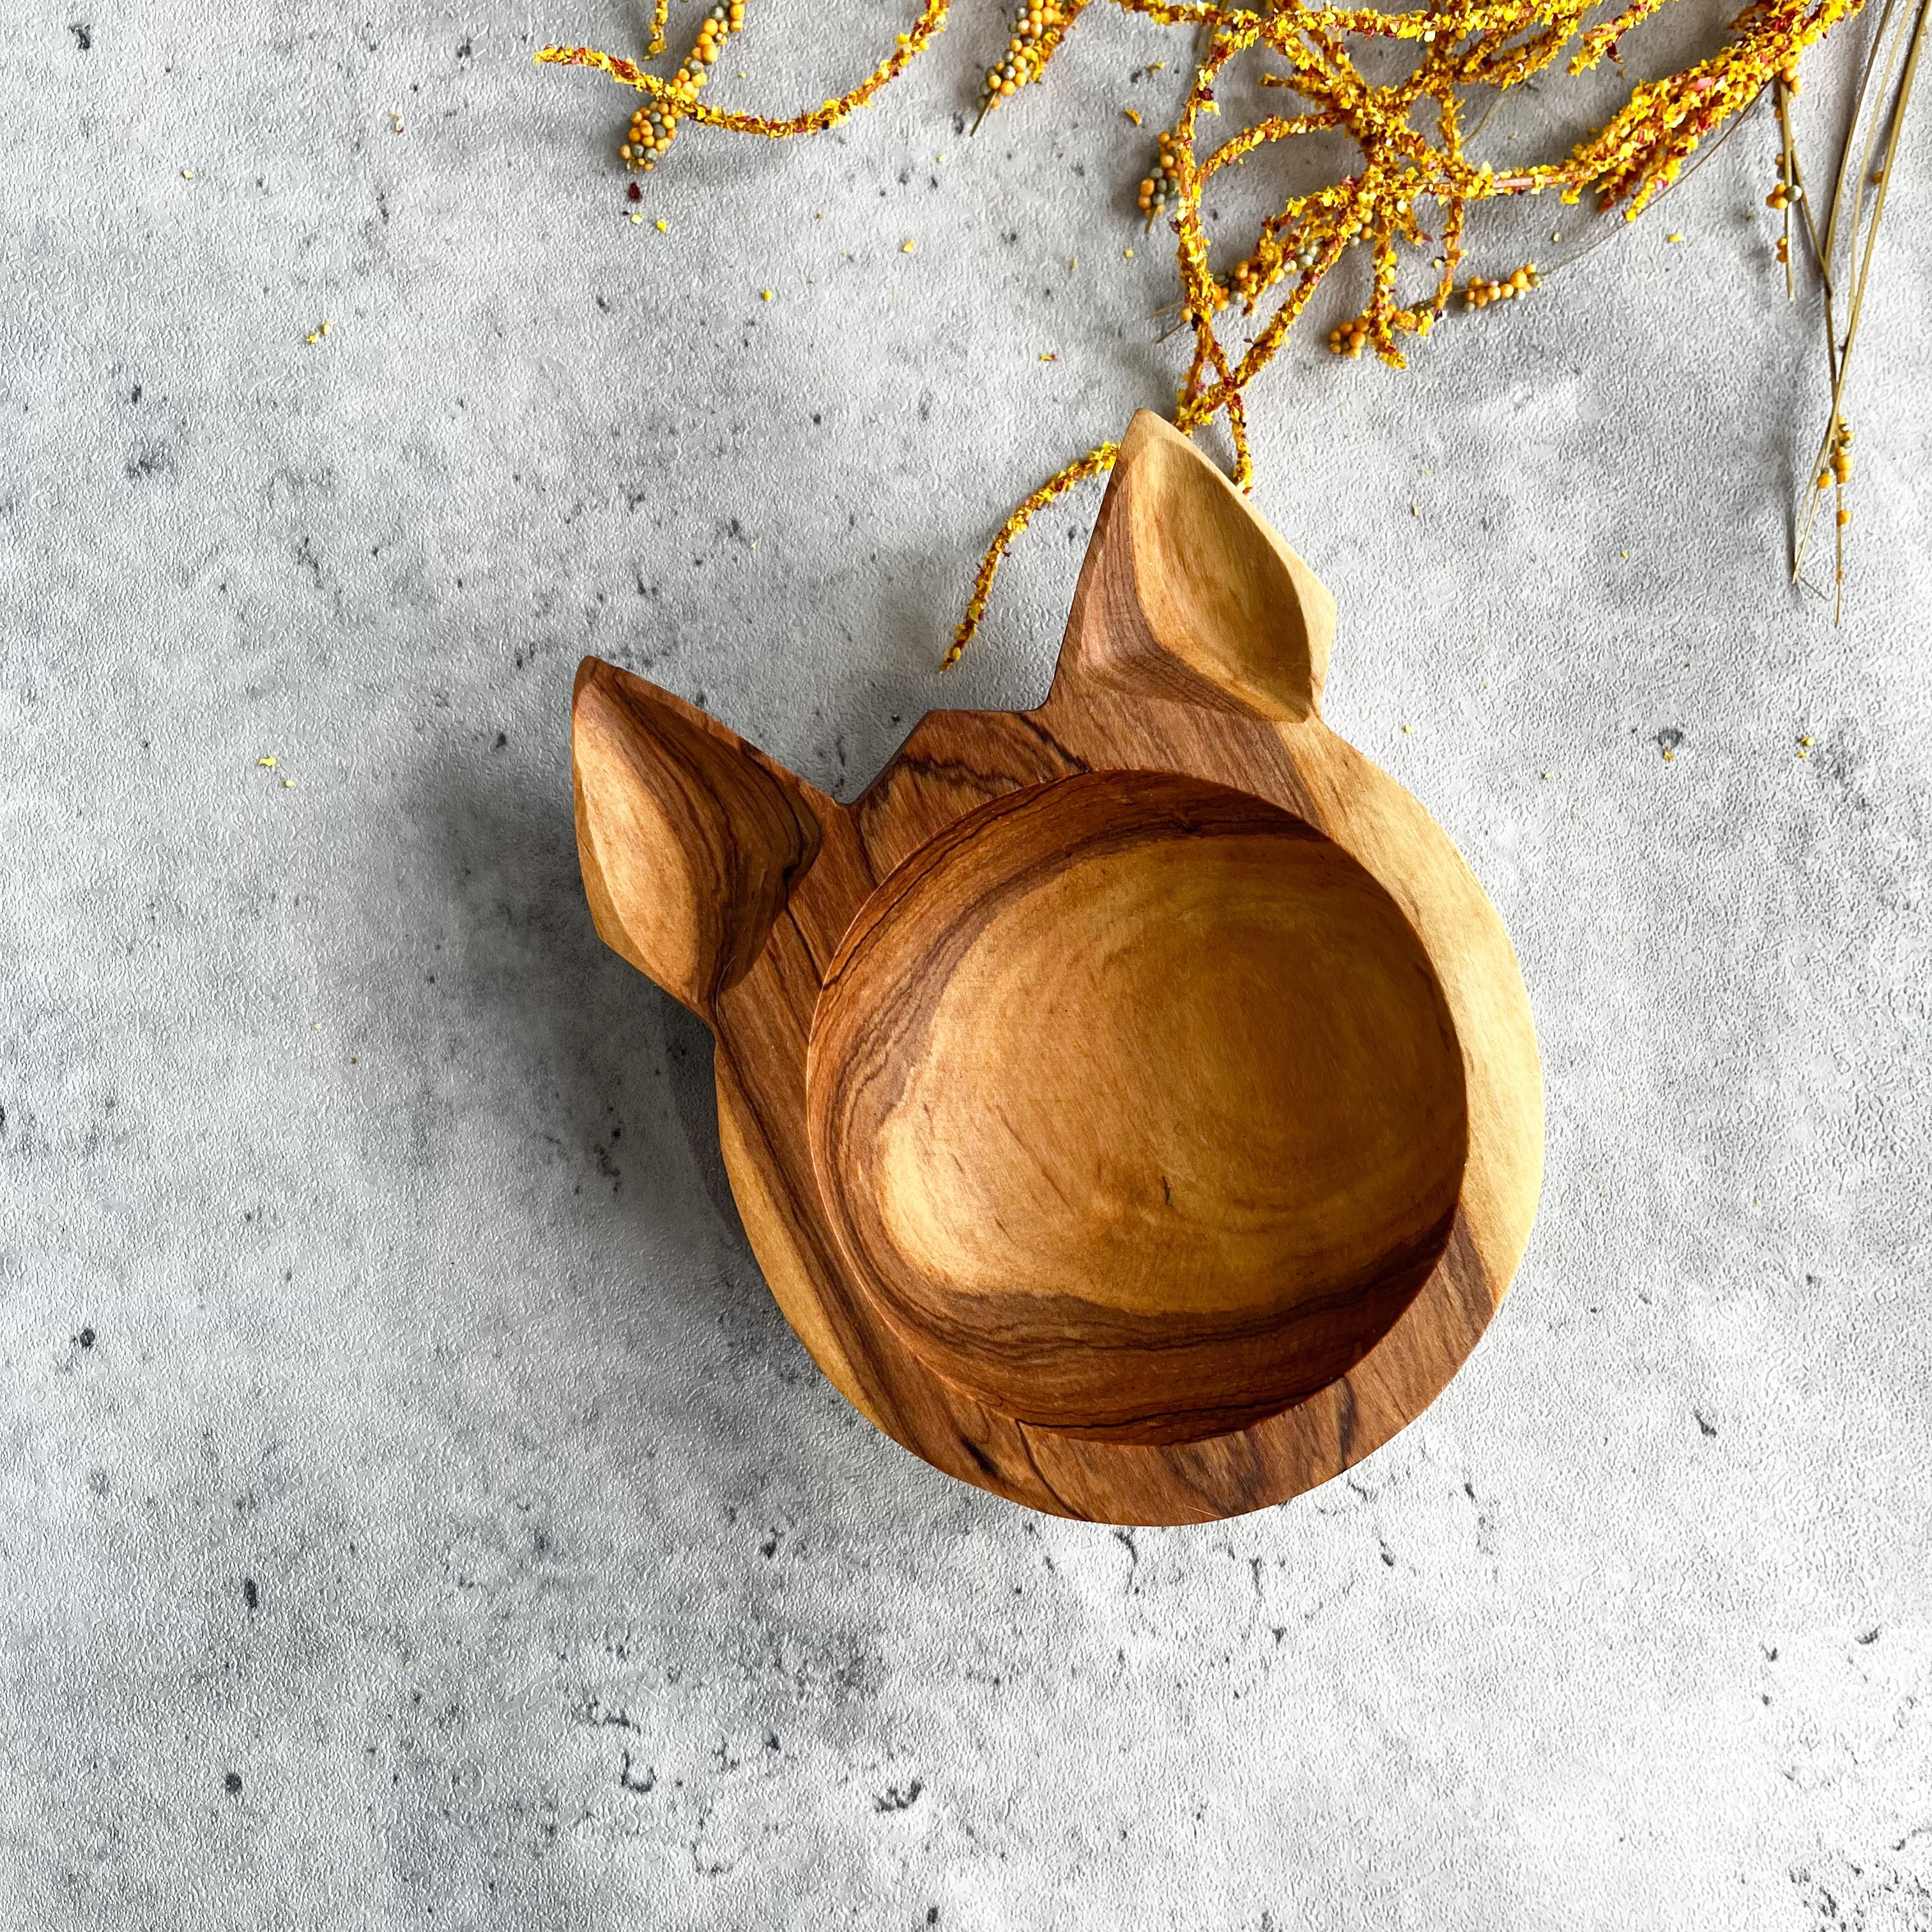 JustOne's small cat shaped wooden bowl handcrafted in Kenya